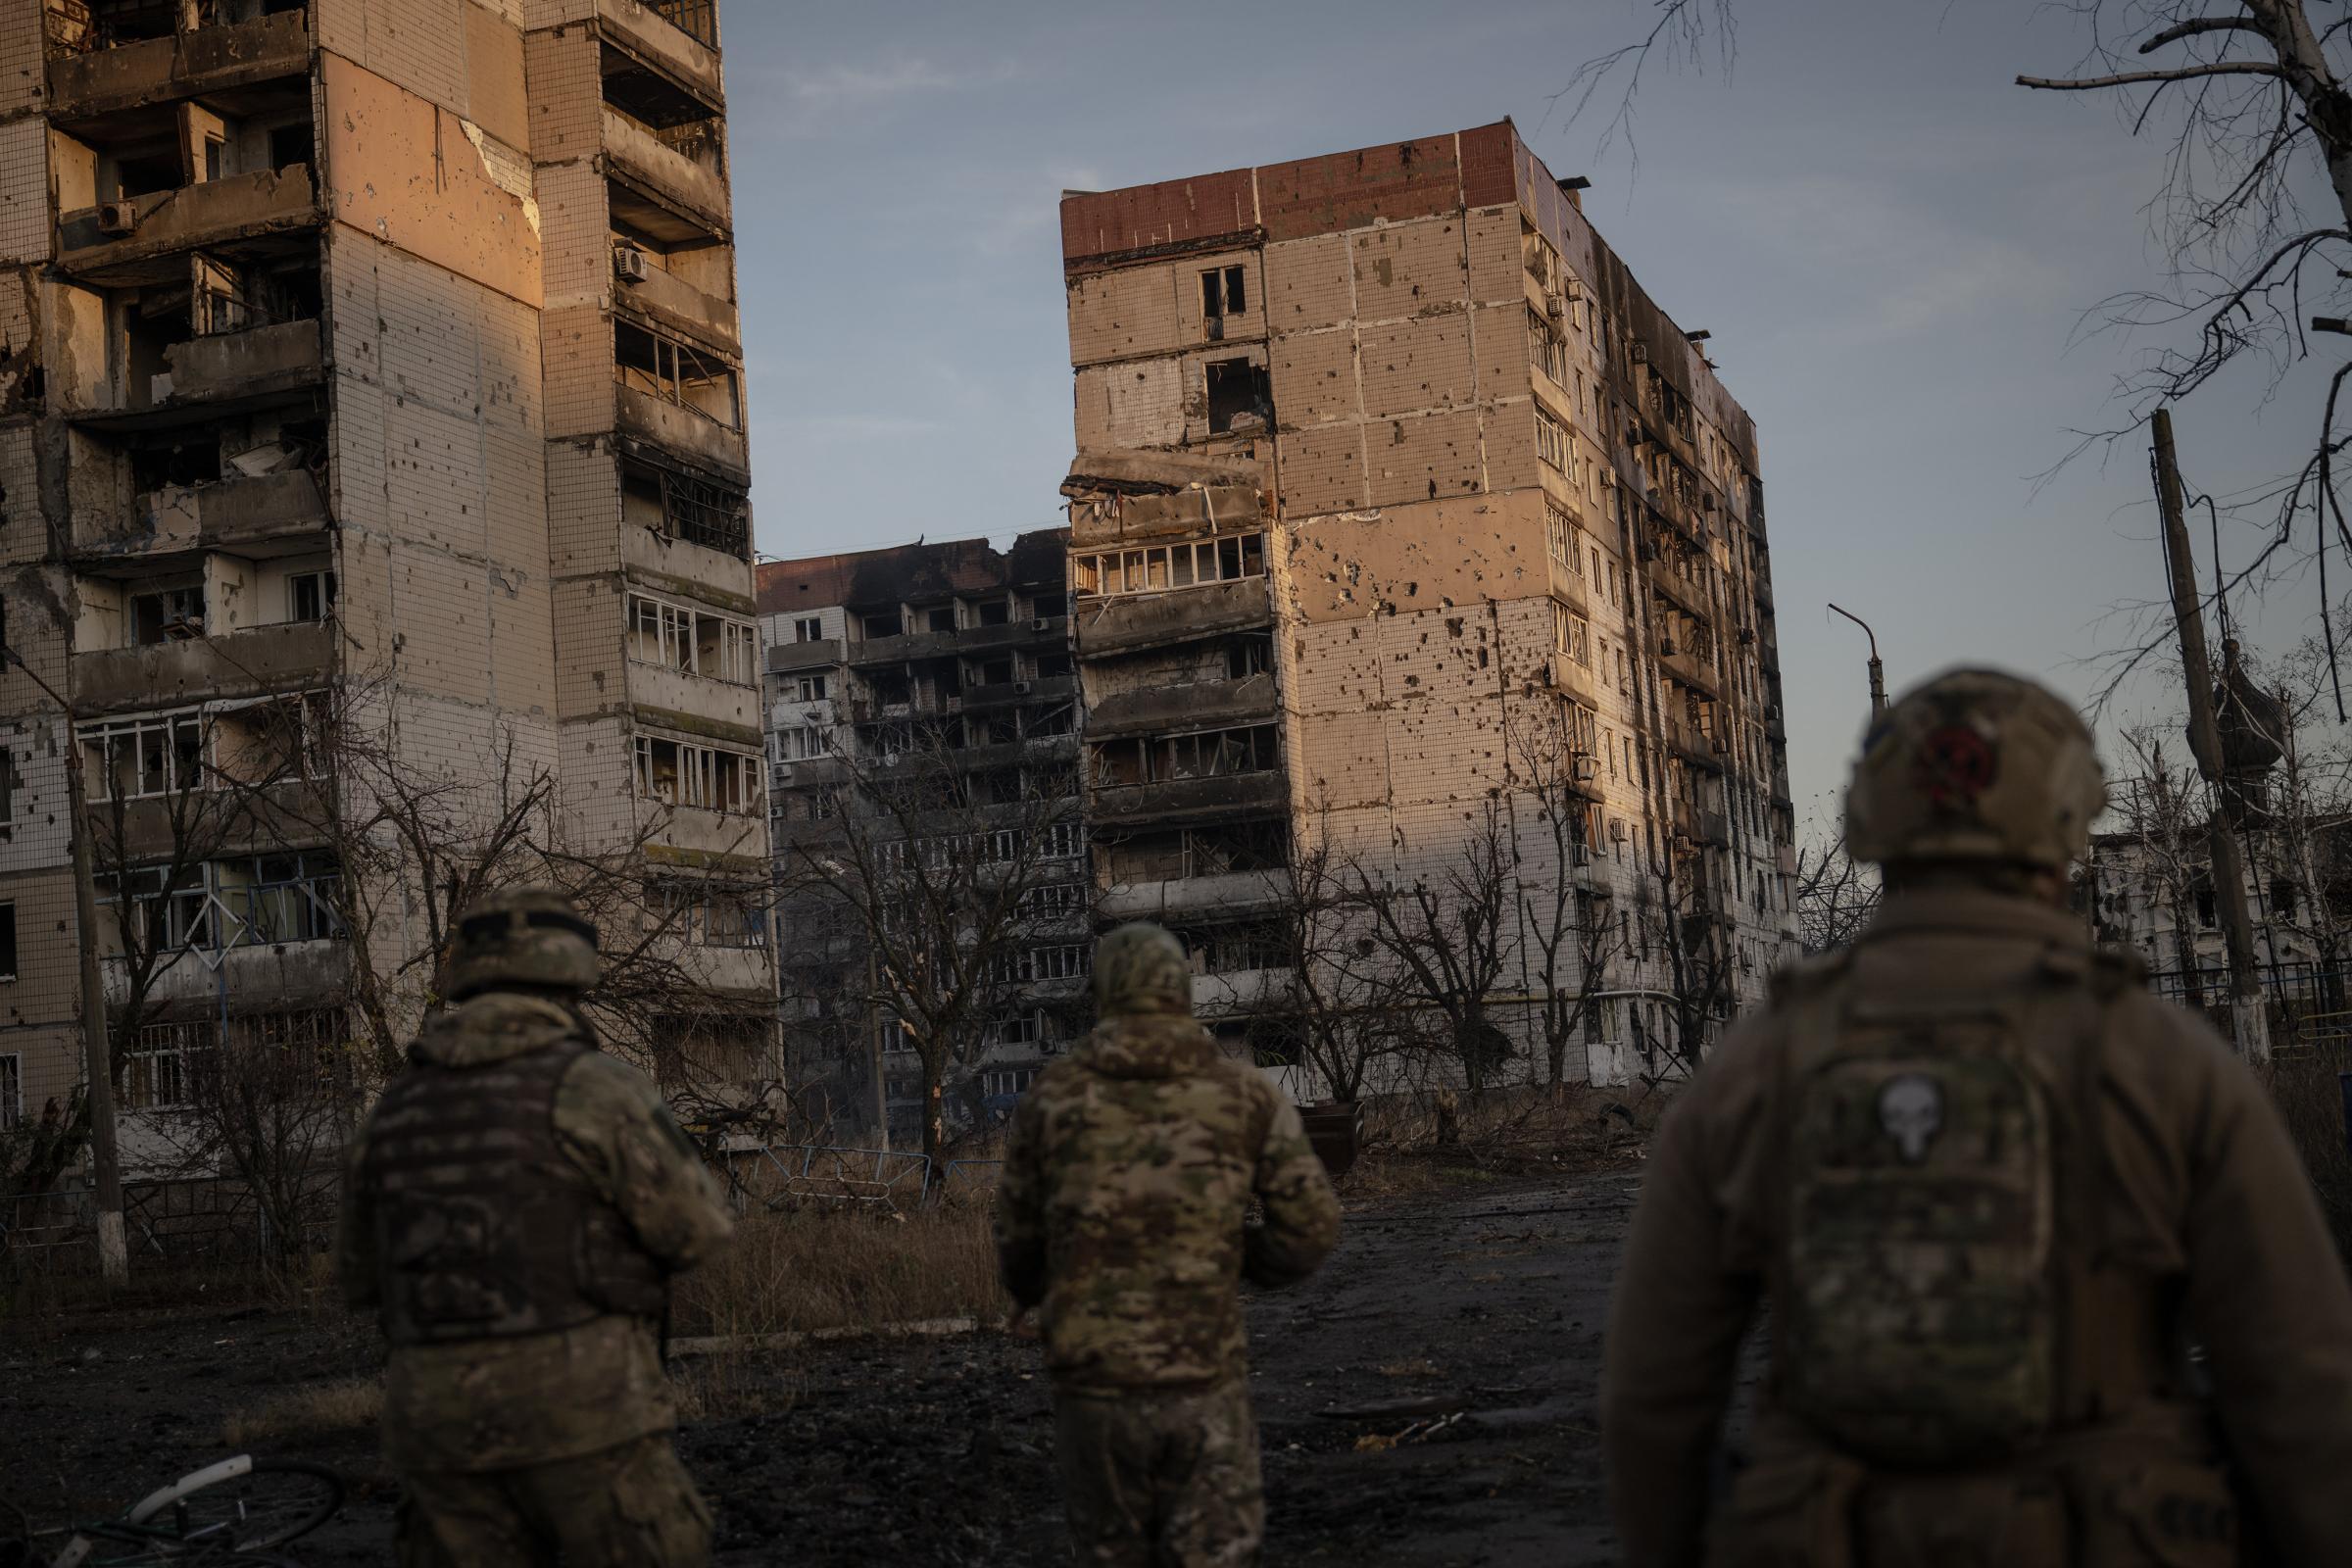 DONETSK, UKRAINE - NOVEMBER 15: Ukrainian soldiers of the 72nd Mechanized Brigade on duty as Russian attacks on the city of Vuhledar, where a tank duel is taking place between the two armies, continue in Donetsk Oblast, Ukraine on November 15, 2023.